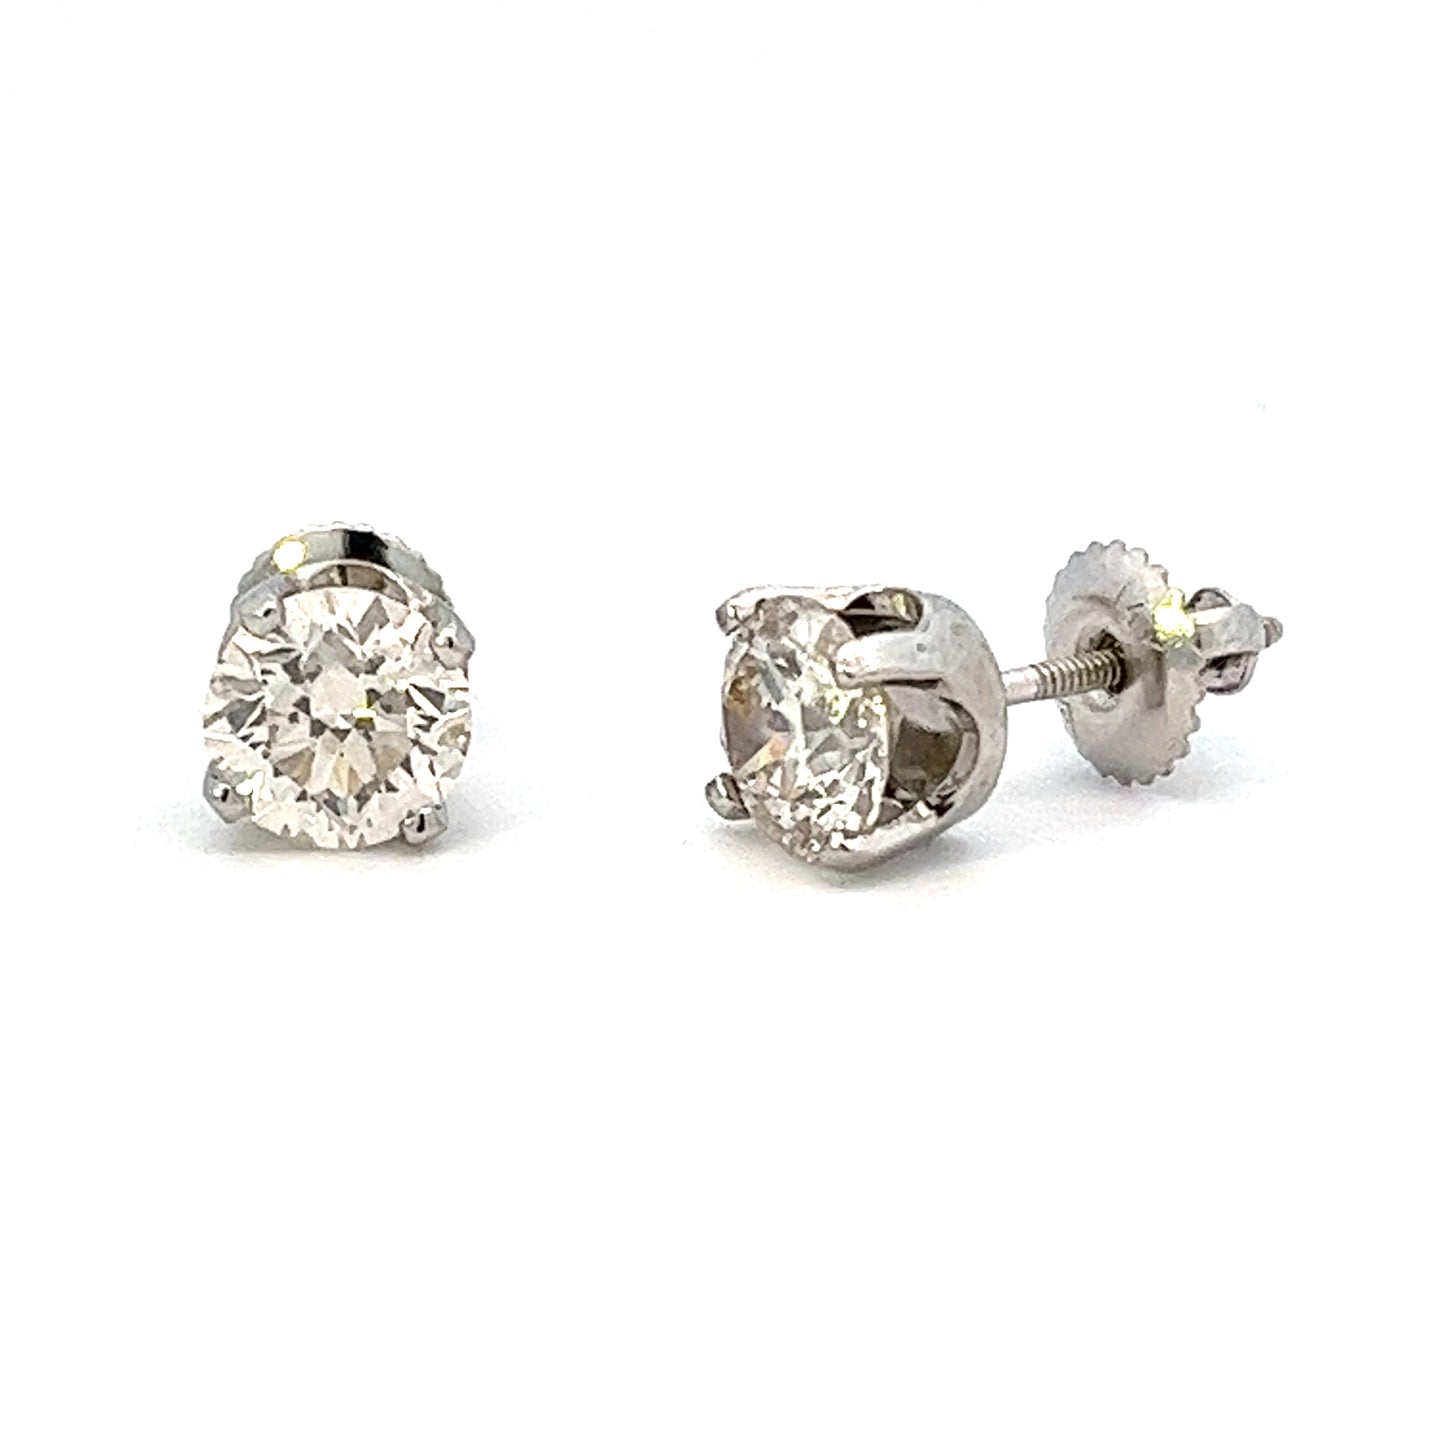 2.00ct total weight round diamond stud earrings